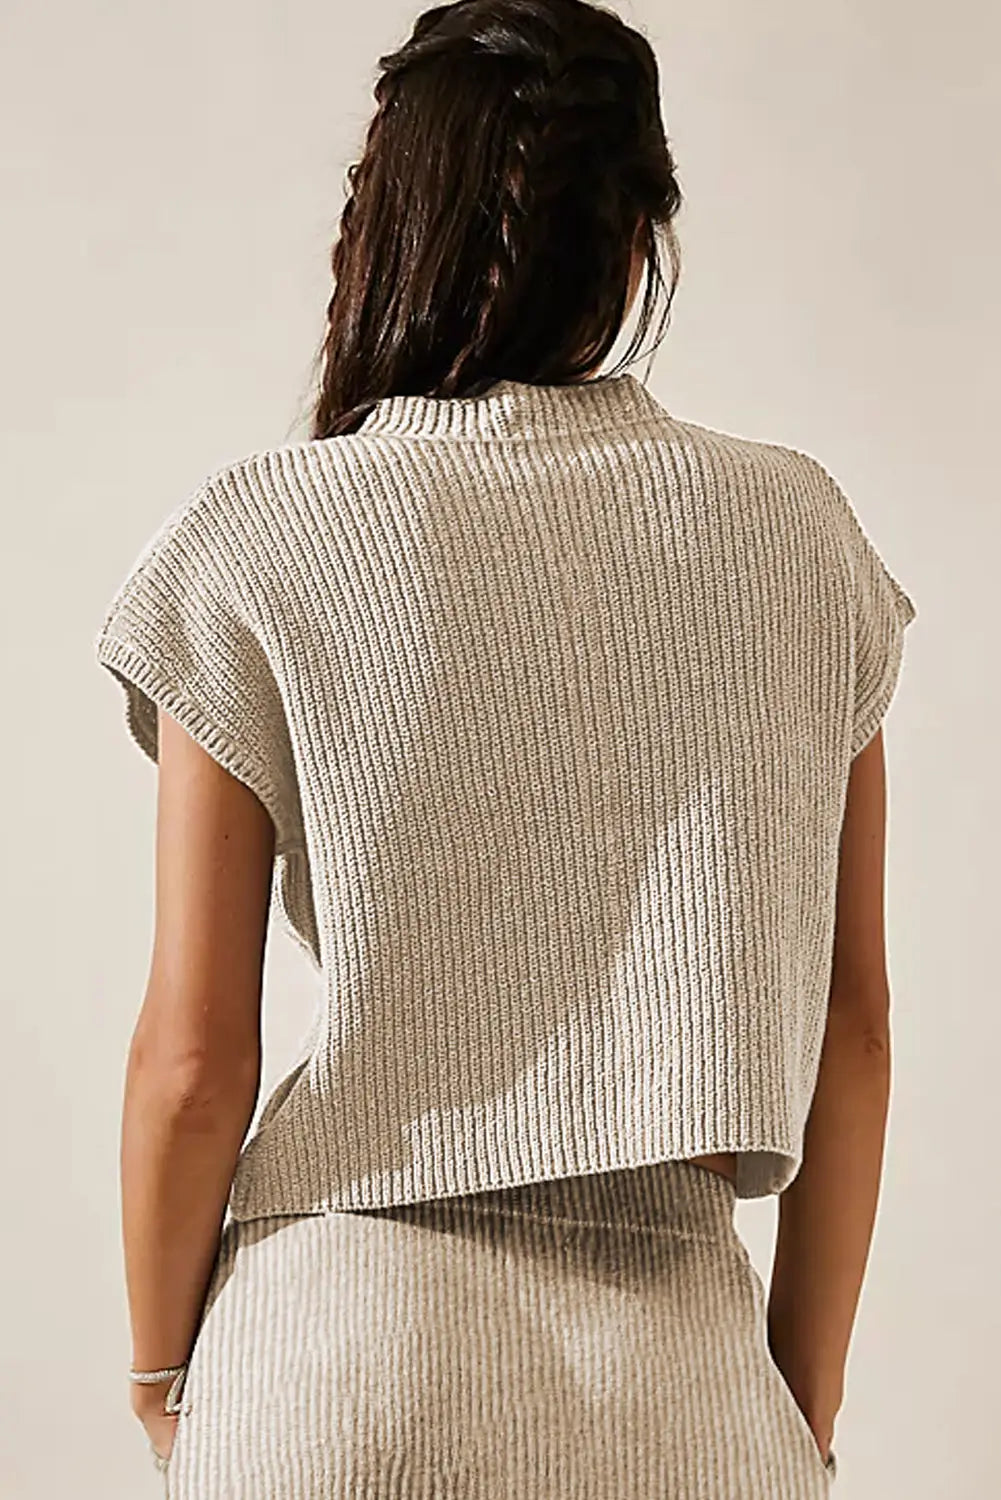 Apricot chest pocket v neck ribbed cap sleeve sweater - tops